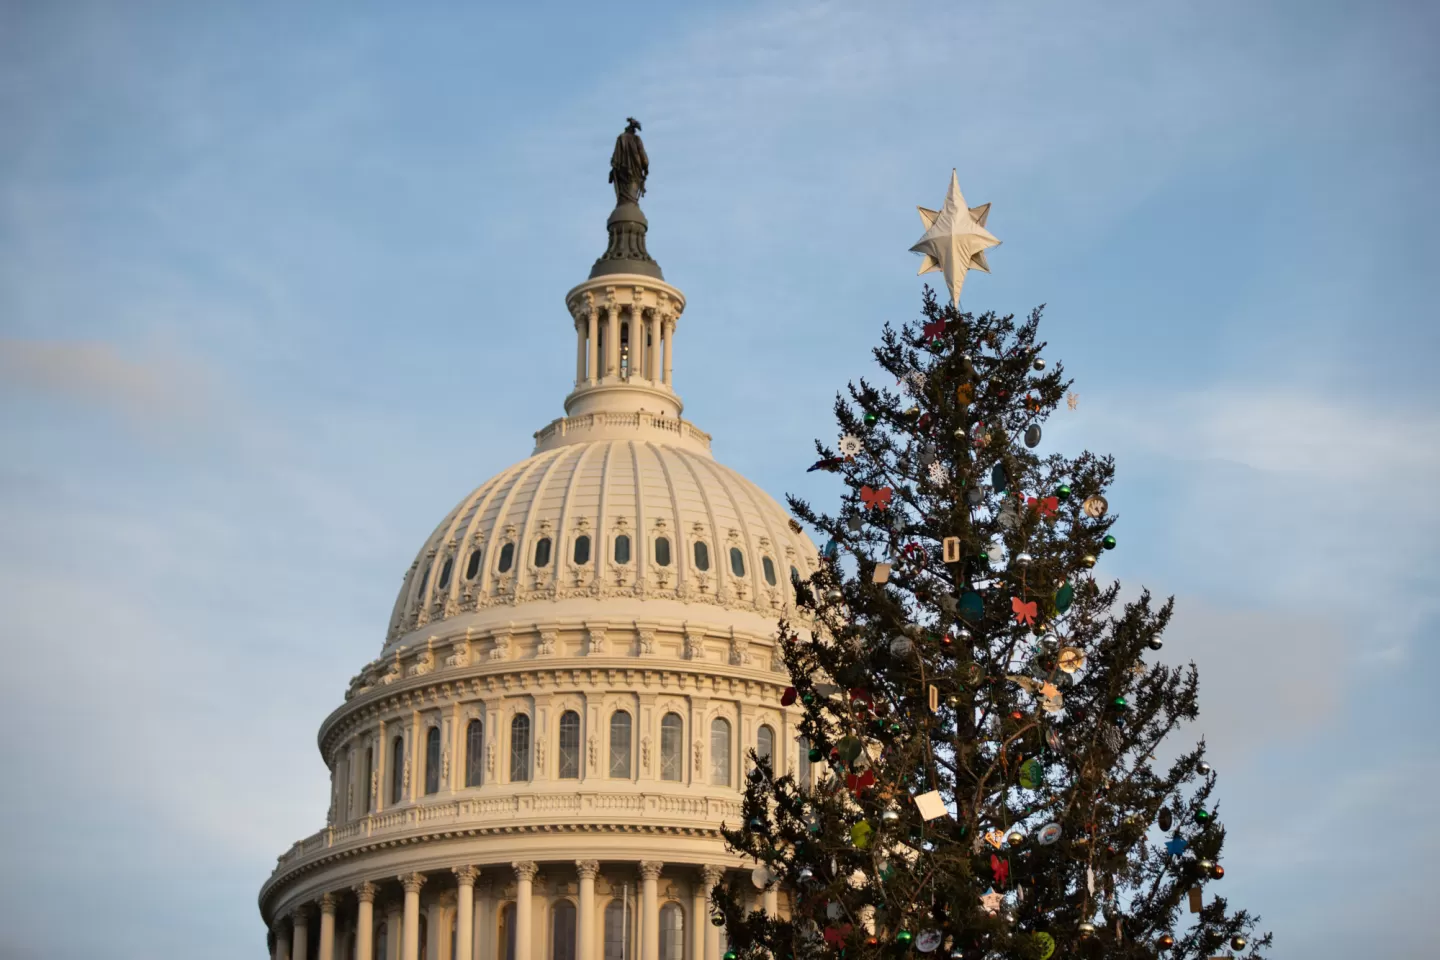 Capitol Dome, blue sky and Christmas tree.